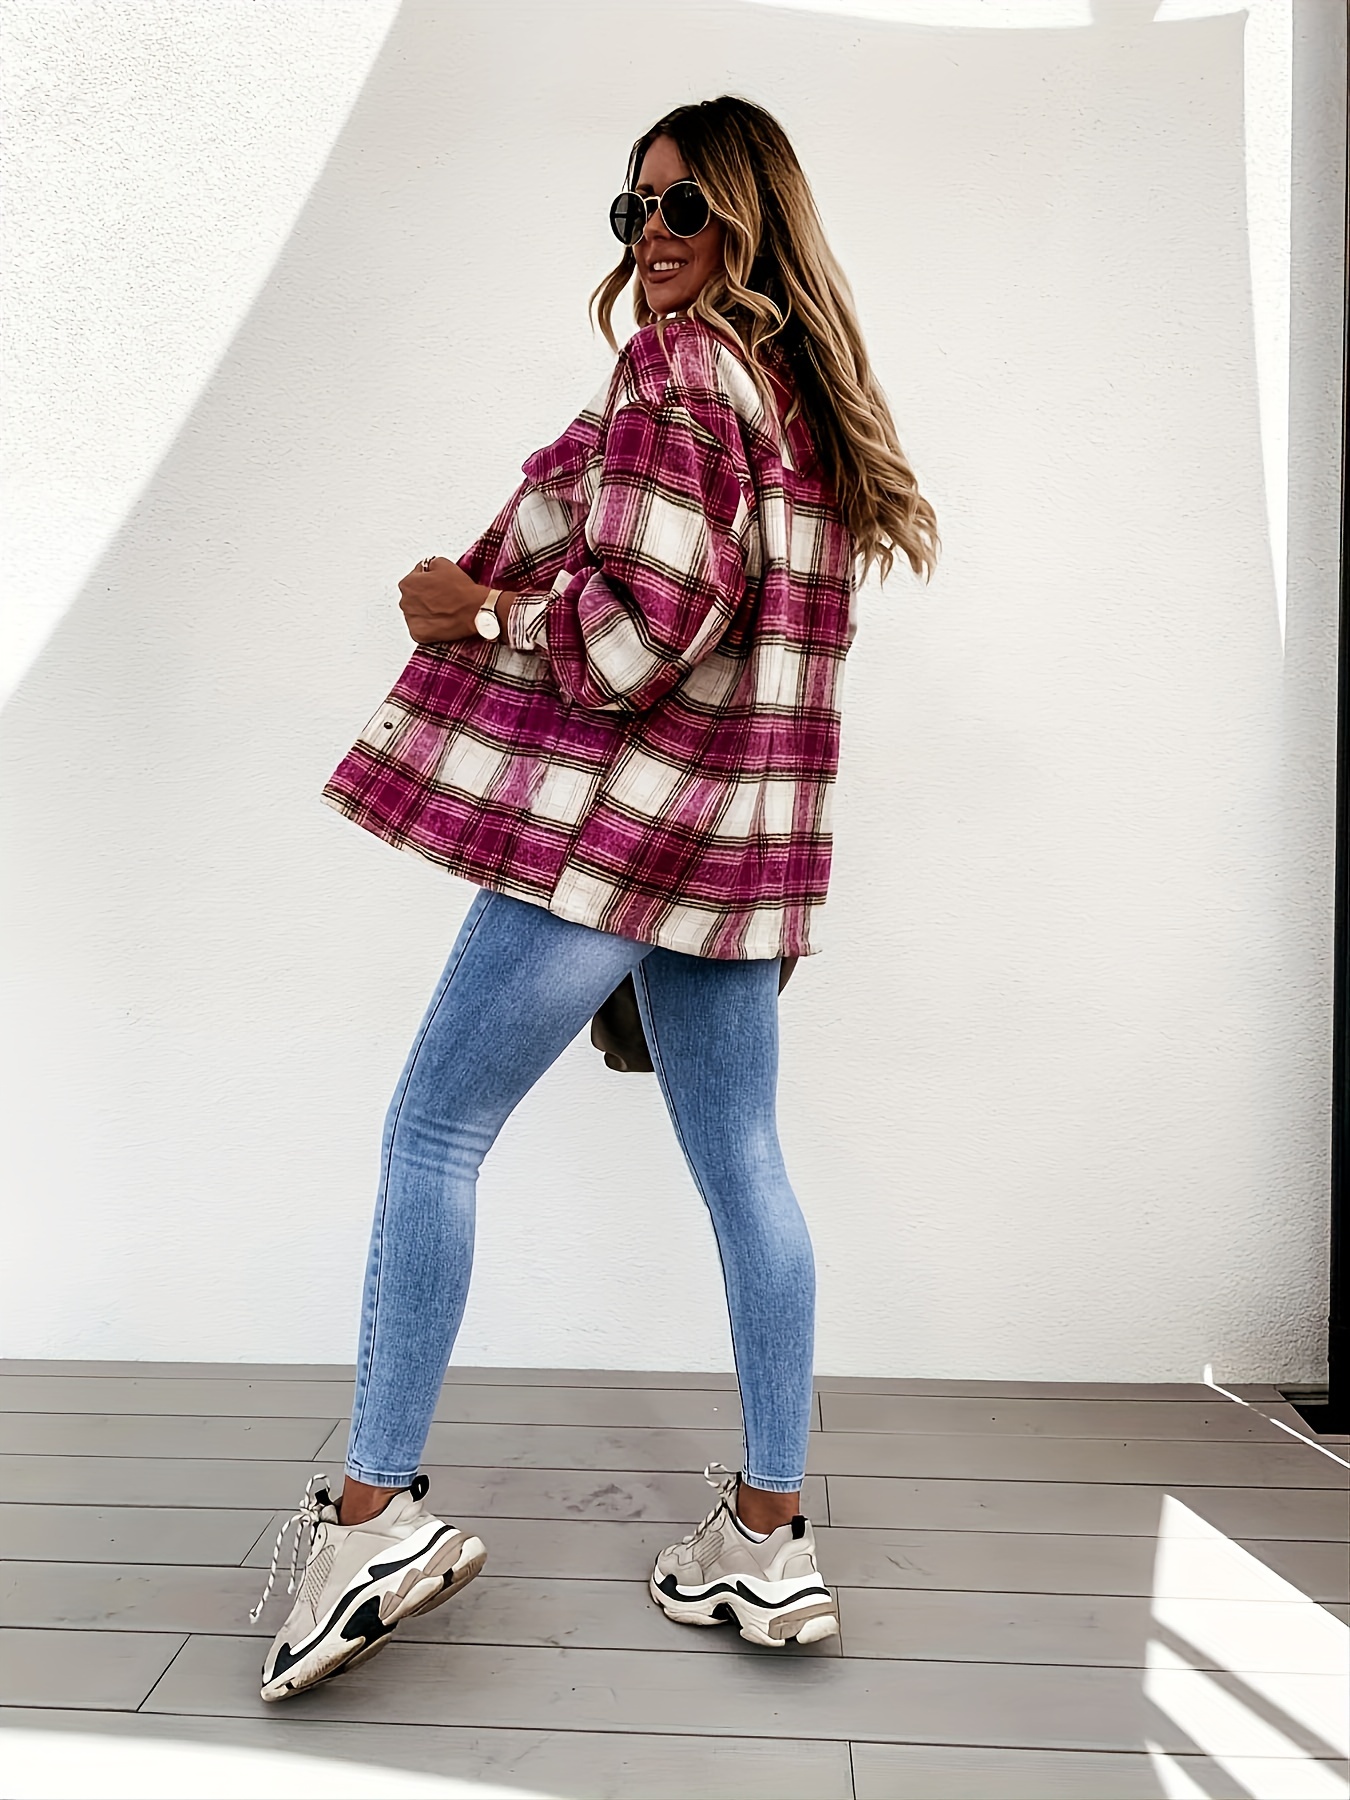 Blouses for Women Fashion 2022 Women's Flannel Plaid Shirts Oversized  Button Down Shirts Blouse Long Sleeve Fall Tops